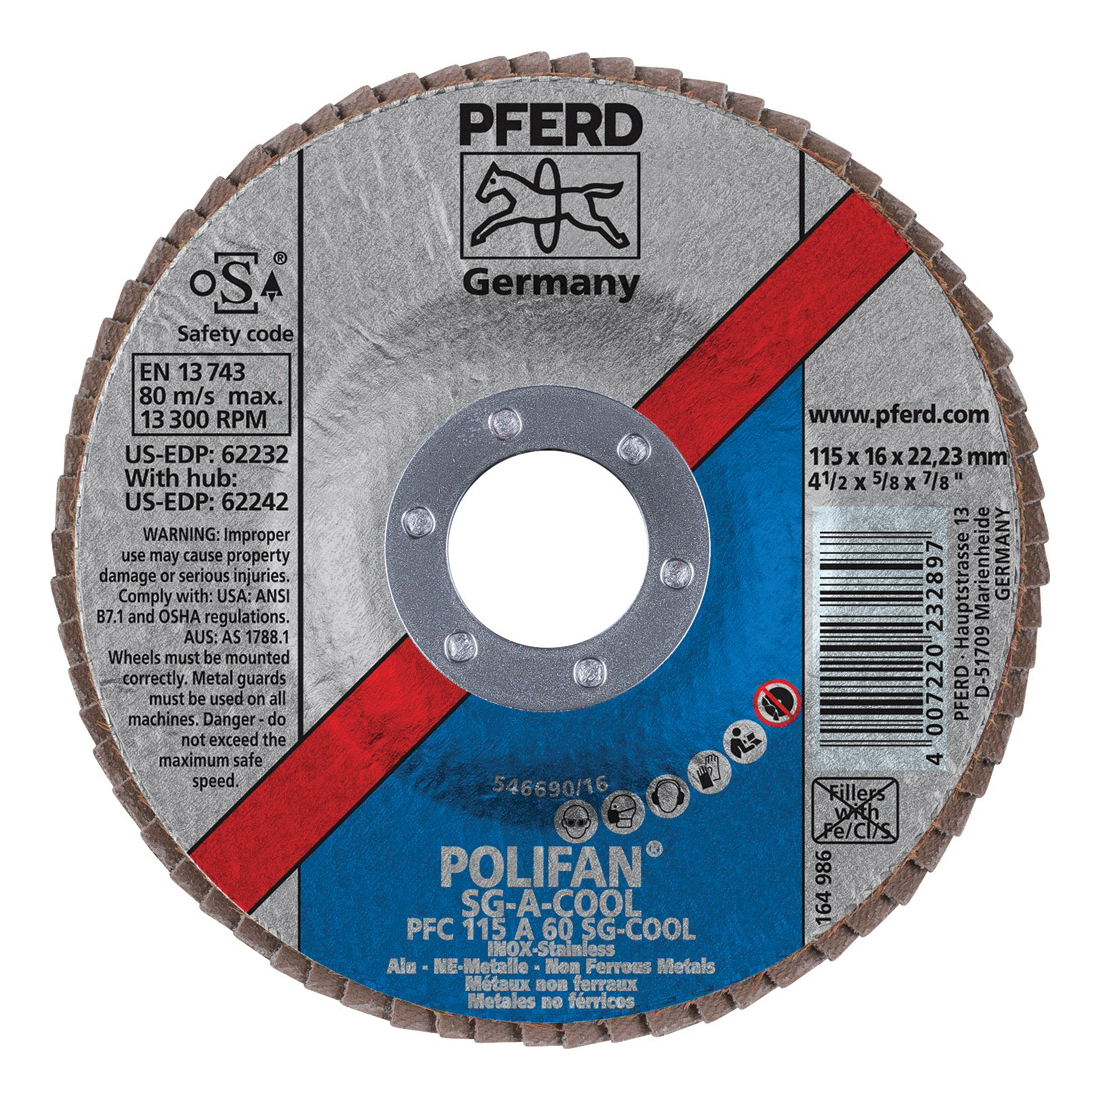 PFERD Polifan® 62232 Performance Line SG A-COOL Unthreaded Coated Abrasive Flap Disc, 4-1/2 in Dia, 7/8 in Center Hole, 60 Grit, Aluminum Oxide Abrasive, Type 29 Conical Disc